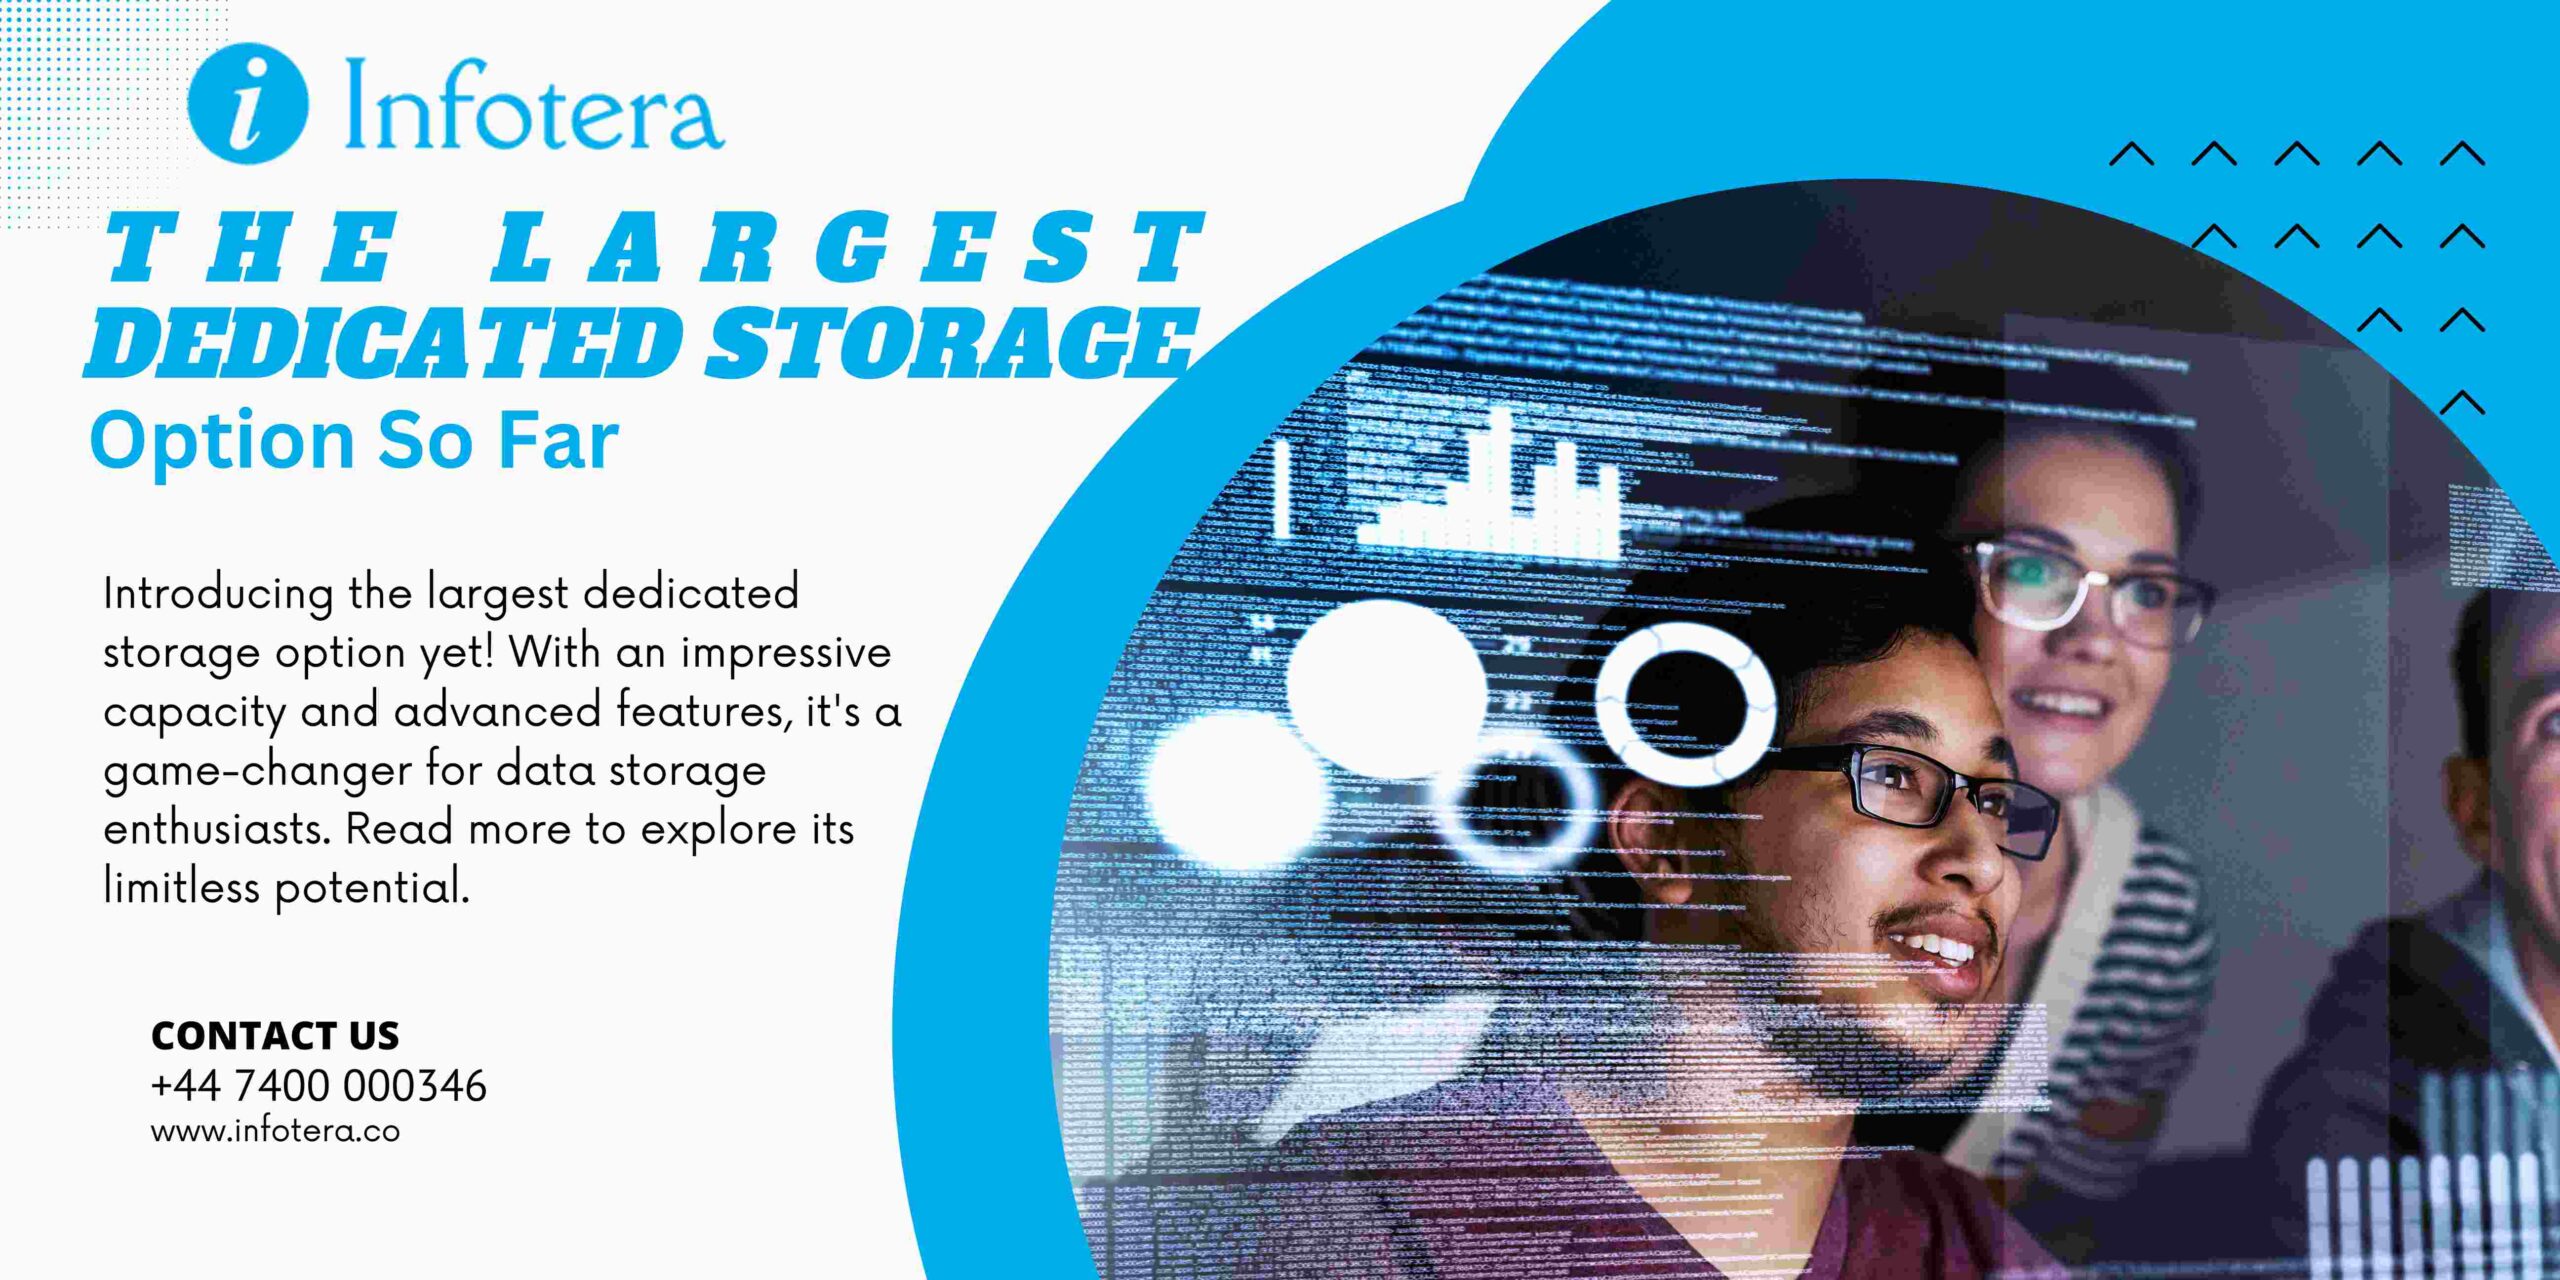 The largest dedicated storage option so far